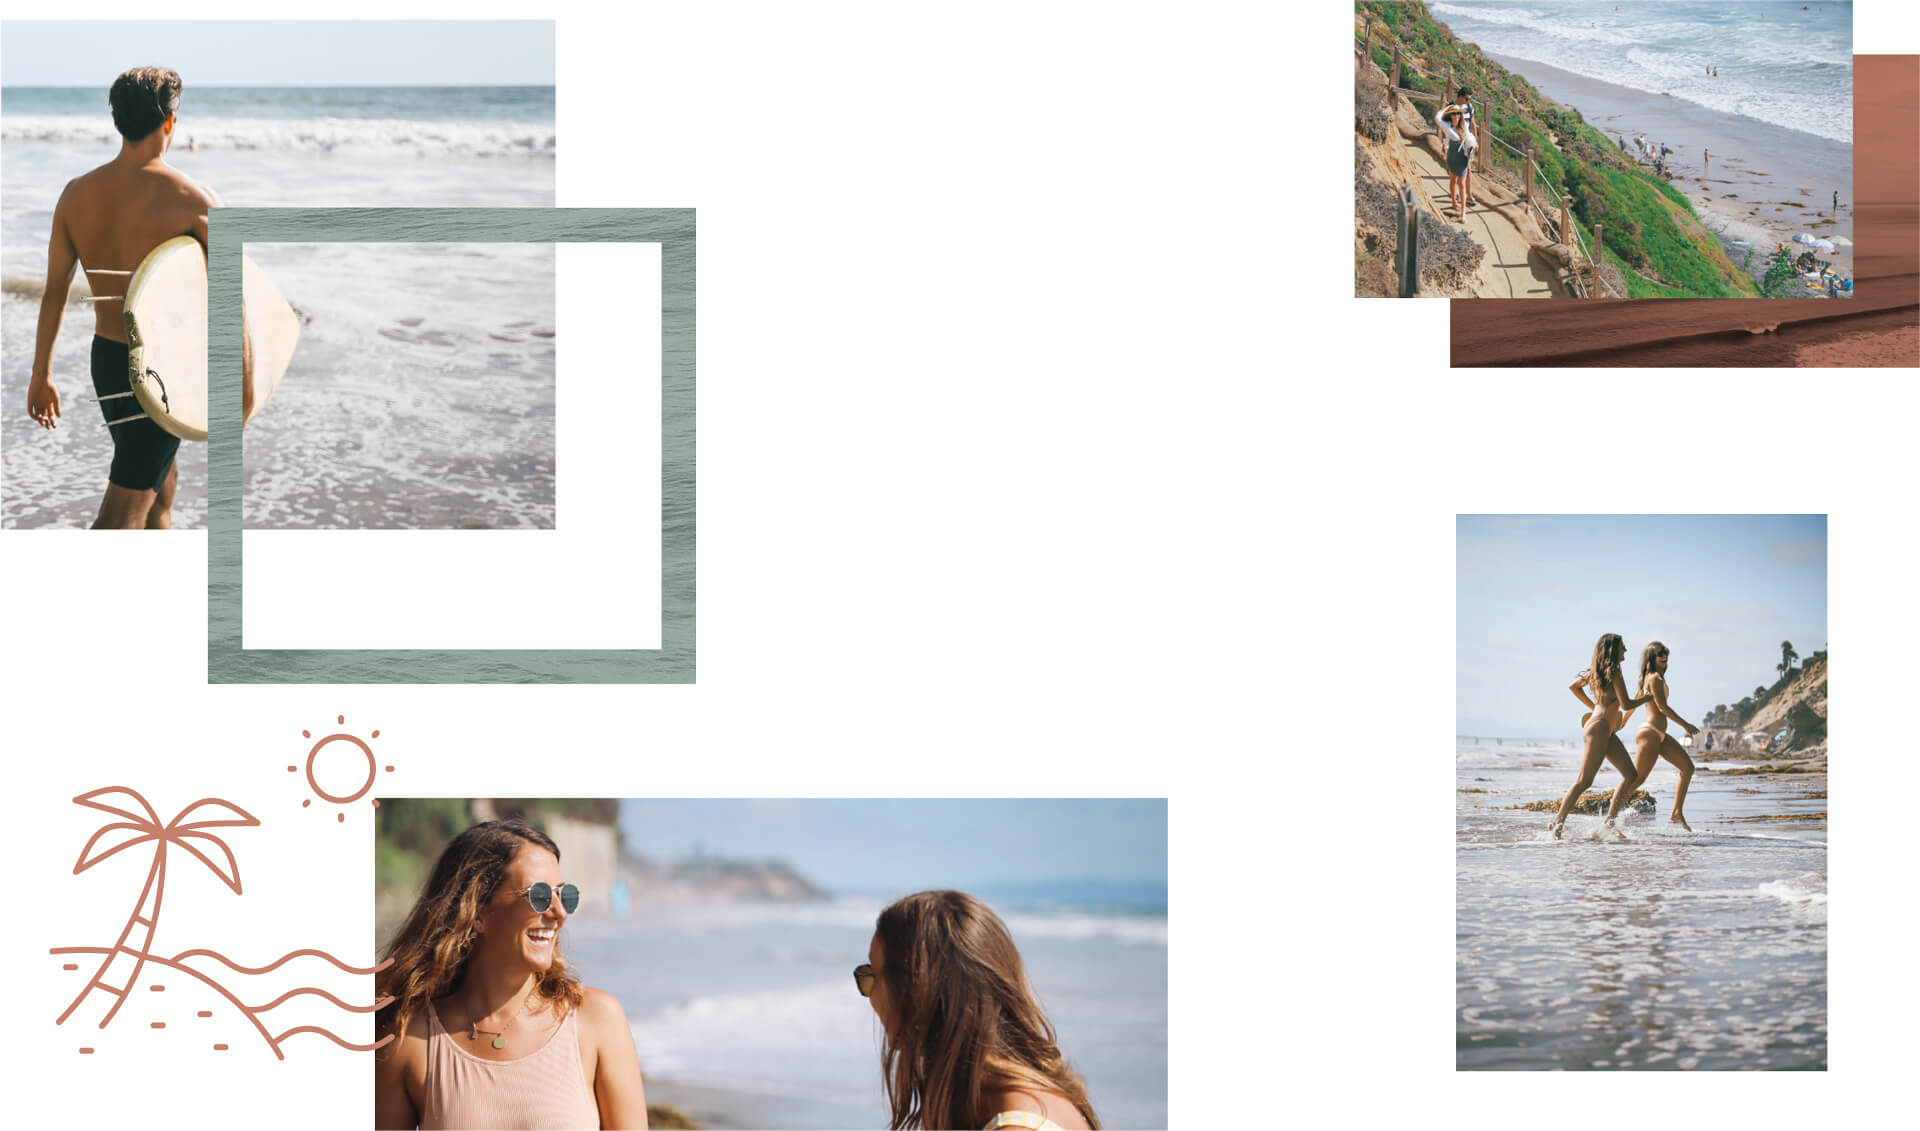 group of images showing the beach next to Surfhouse